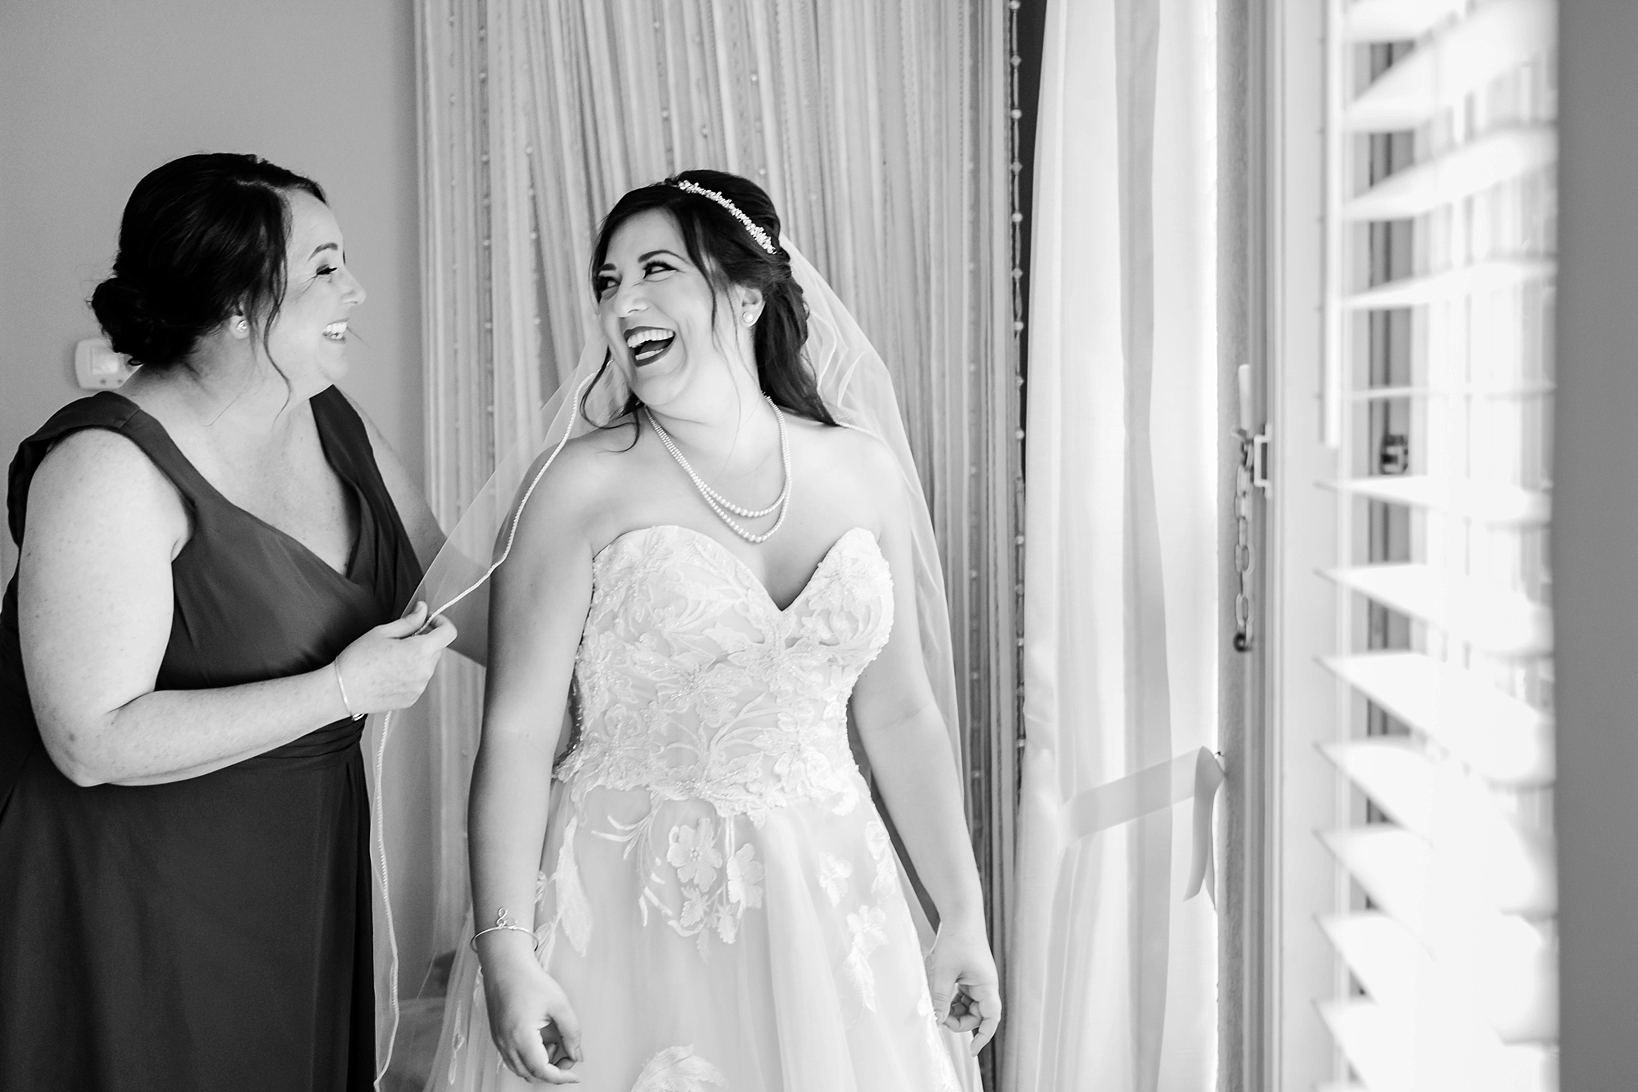 Timeless black and white photo of a Bride and her Bridesmaid sharing a laugh